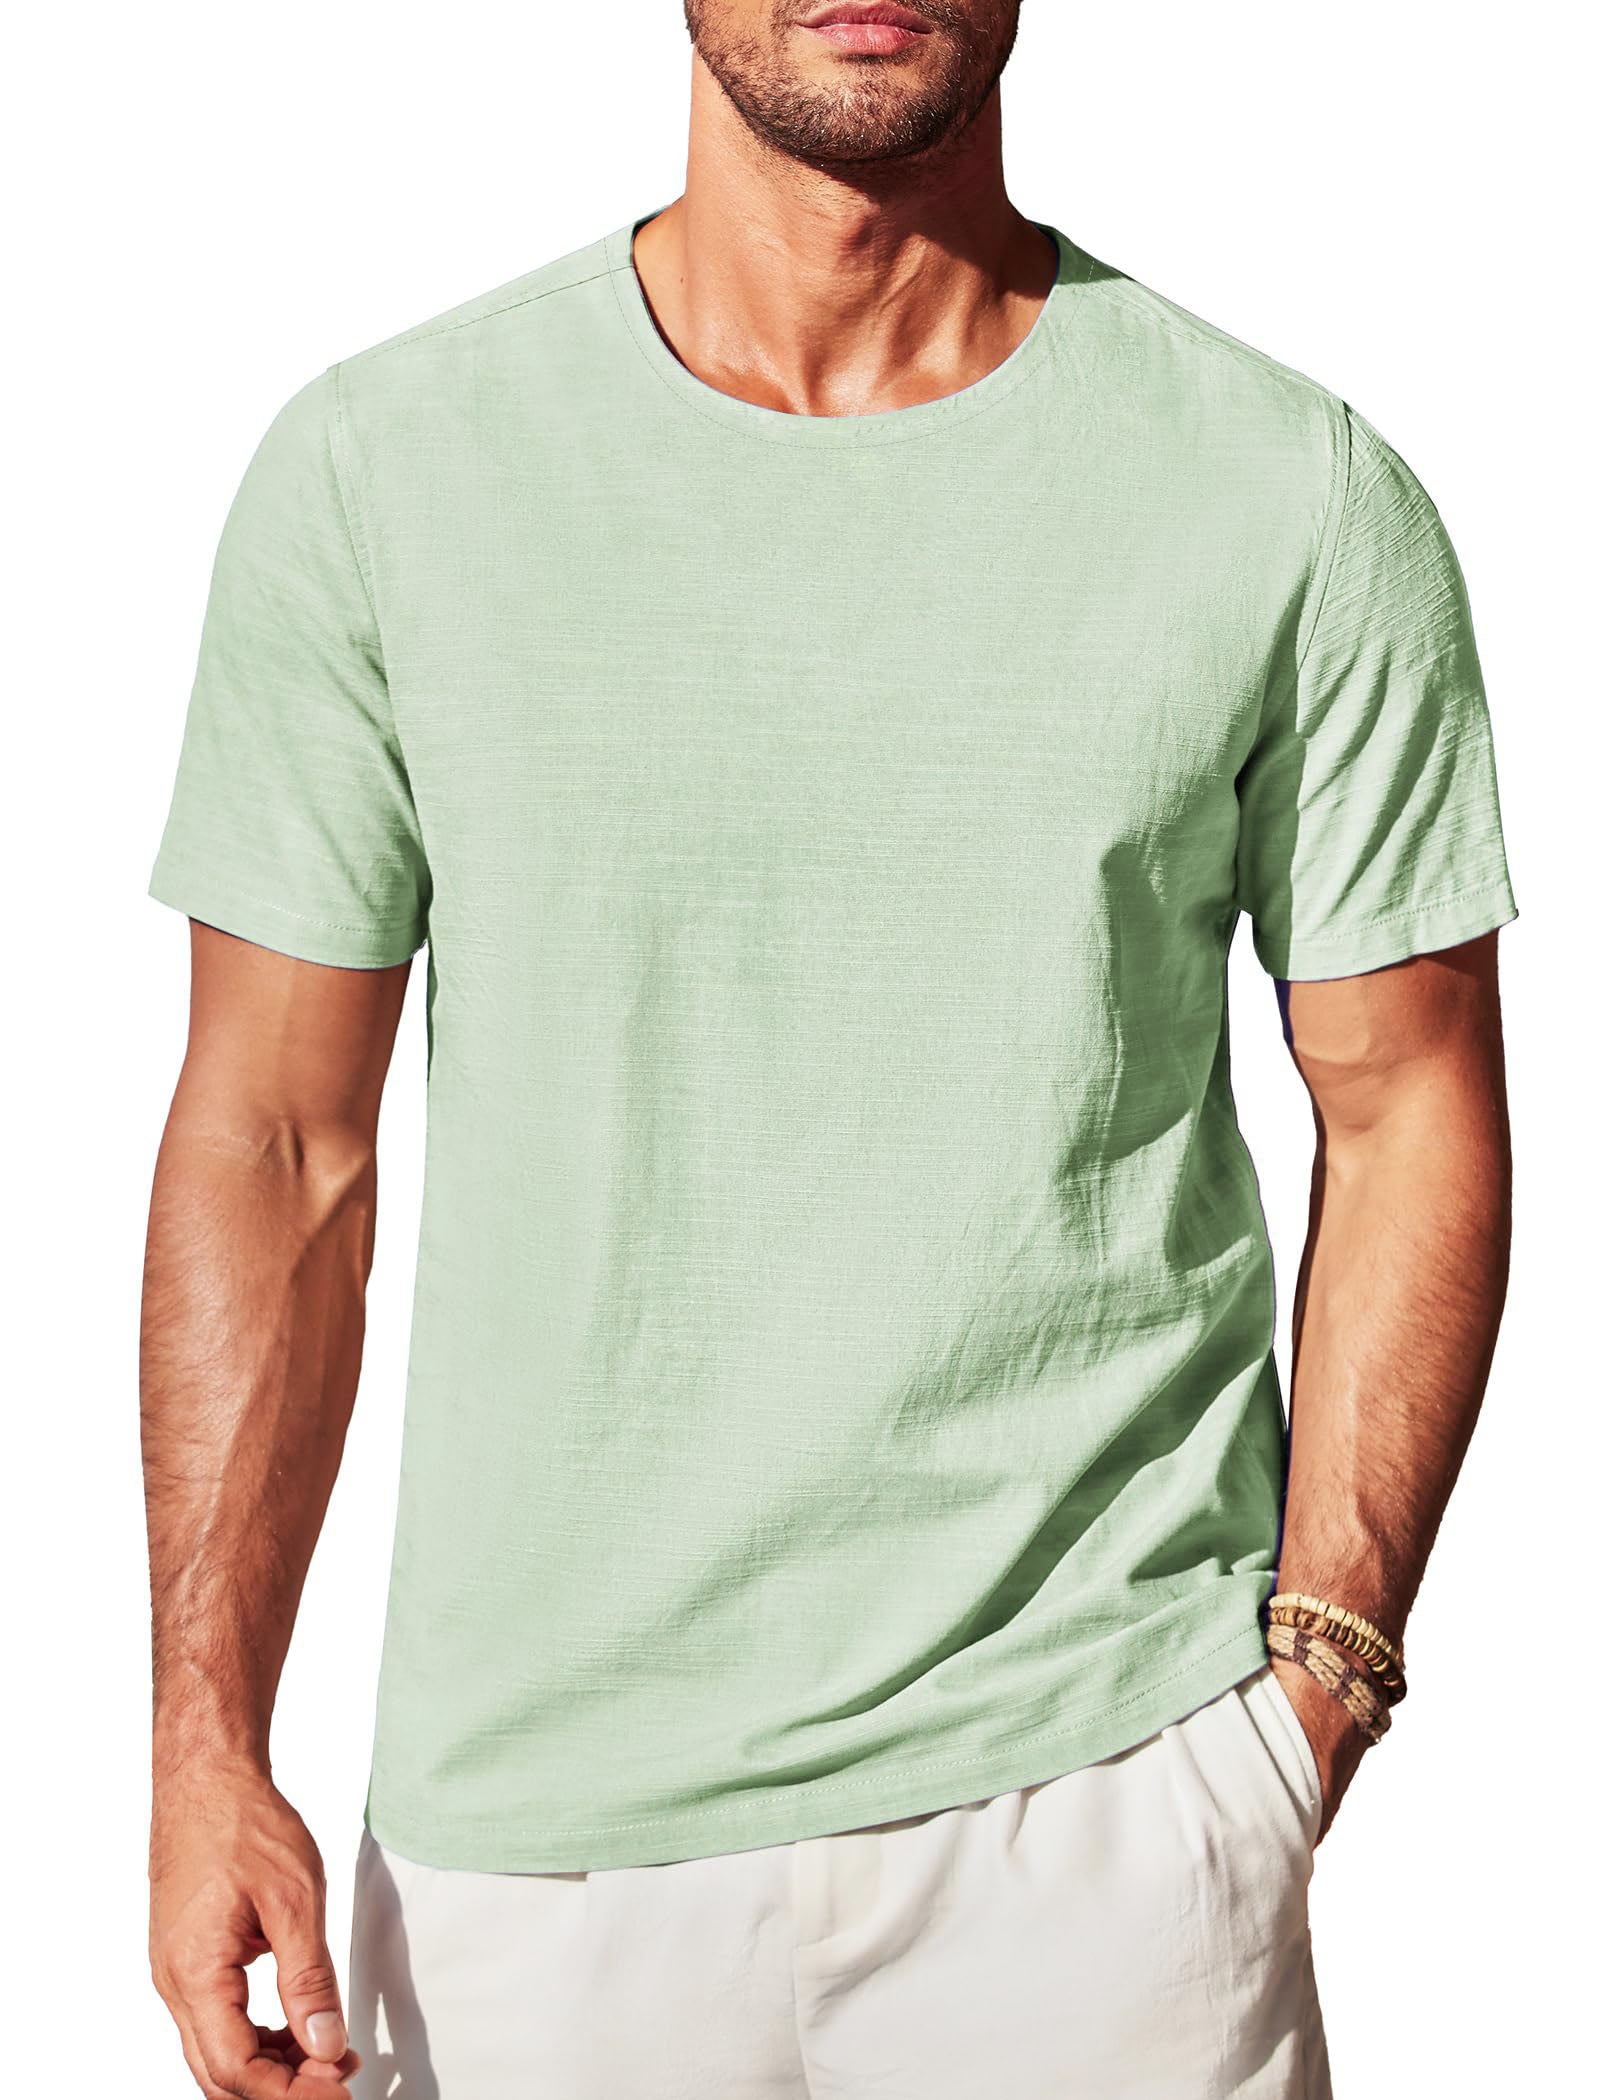 Men's Cotton and Linen Round Neck Short-Sleeved T-shirt